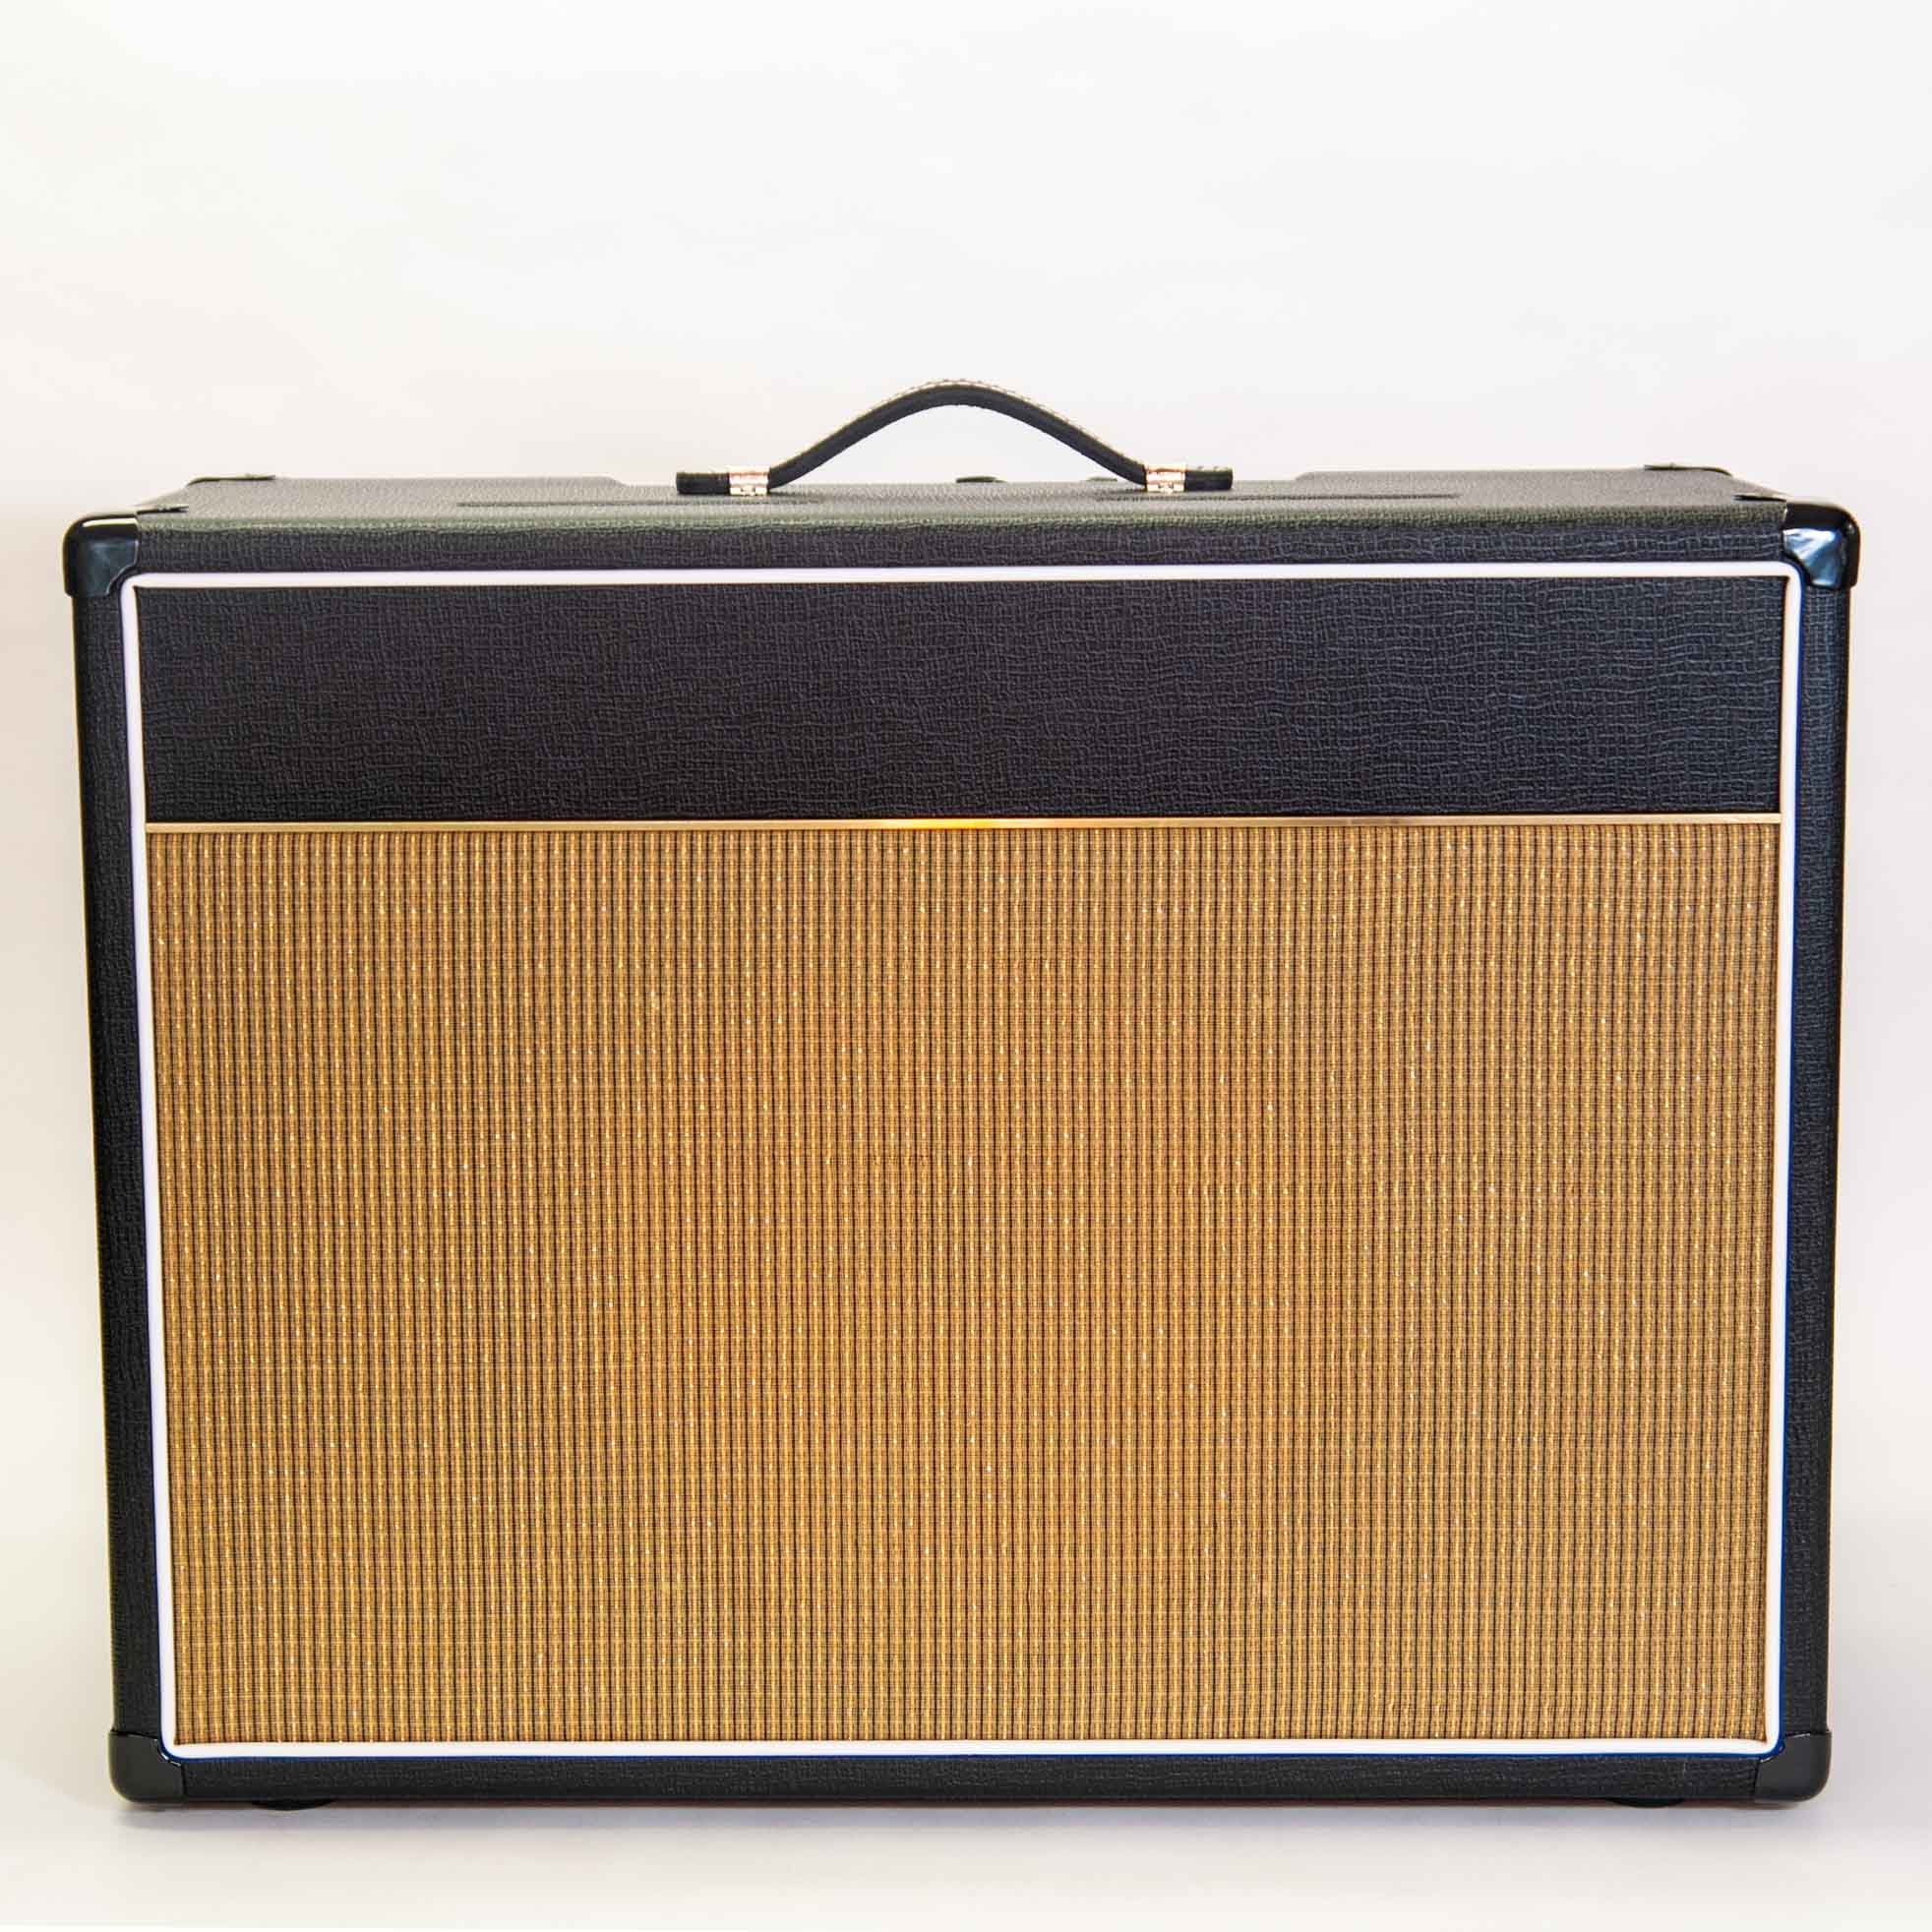 Guitar amp front view, black textured vinyl cover with gold striped grill cloth